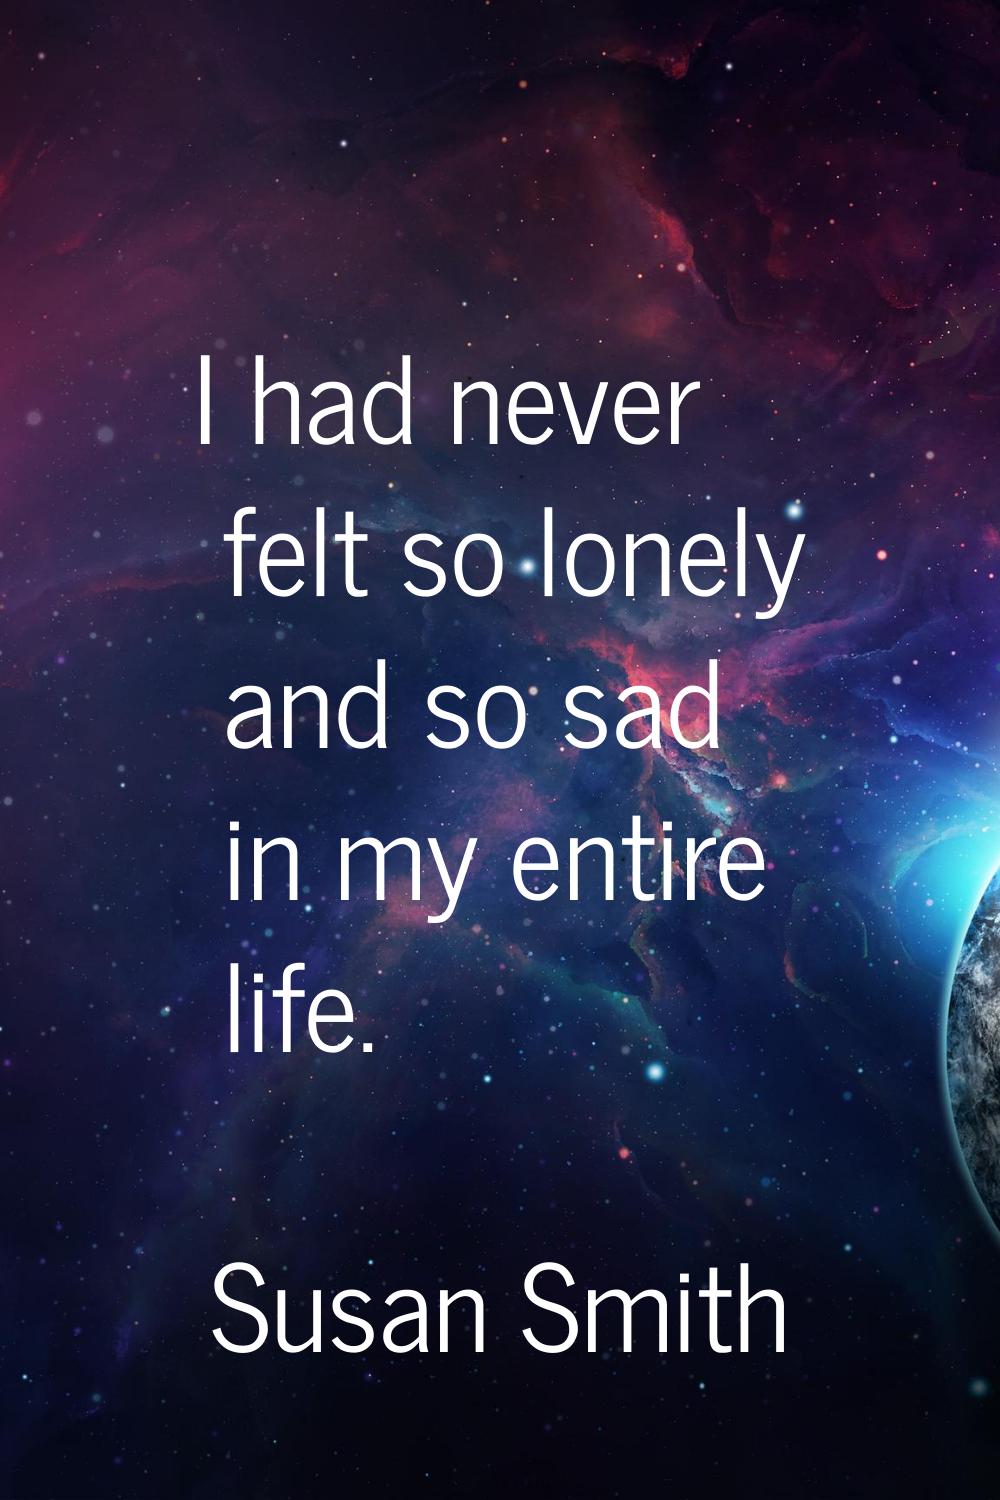 I had never felt so lonely and so sad in my entire life.